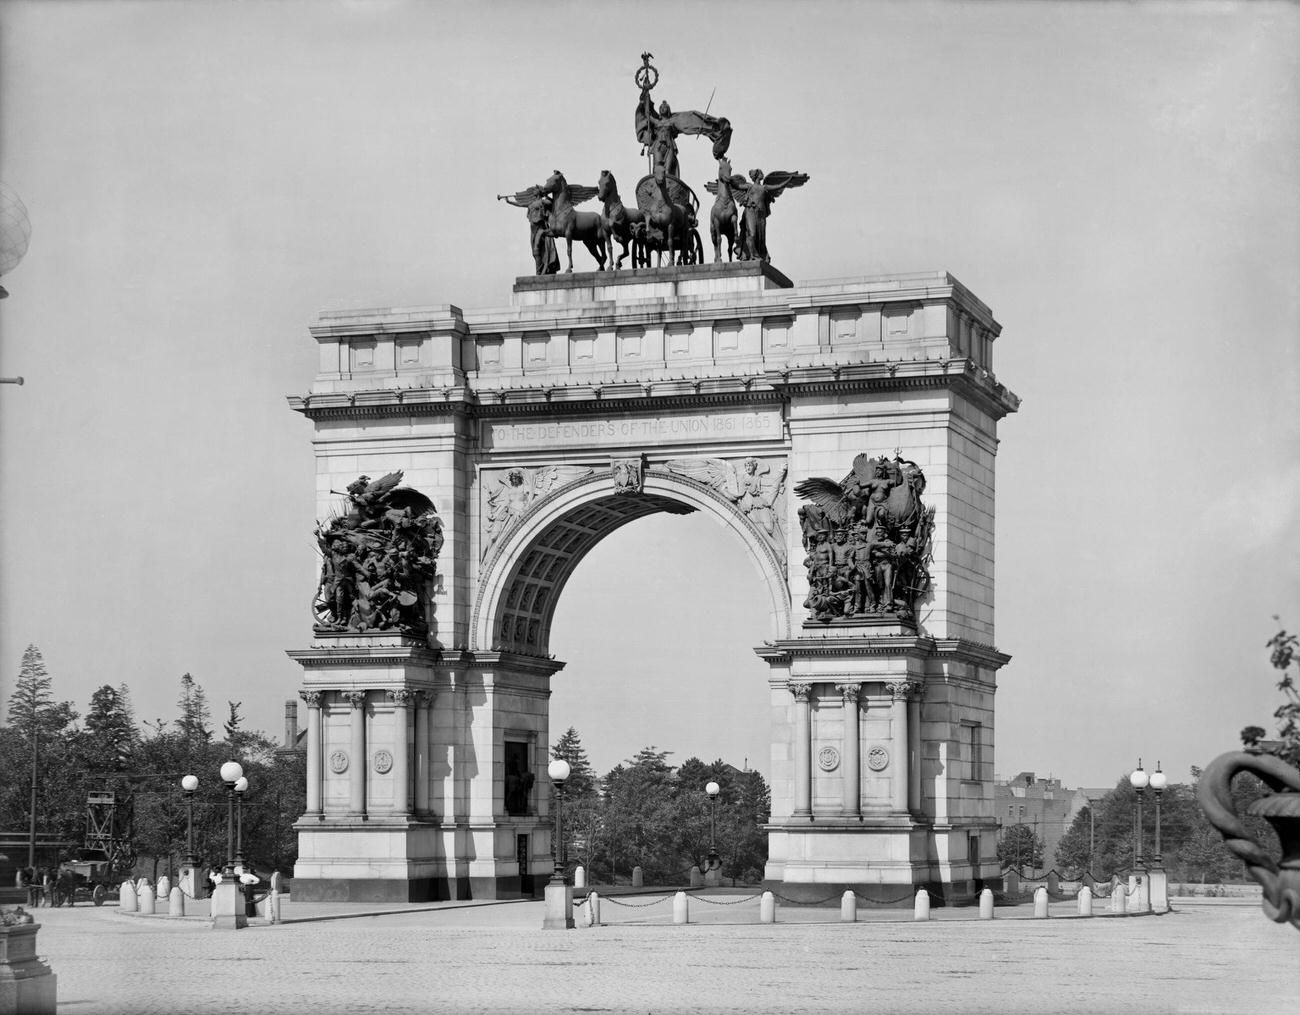 Soldiers' And Sailors' Memorial Arch, Brooklyn, 1900